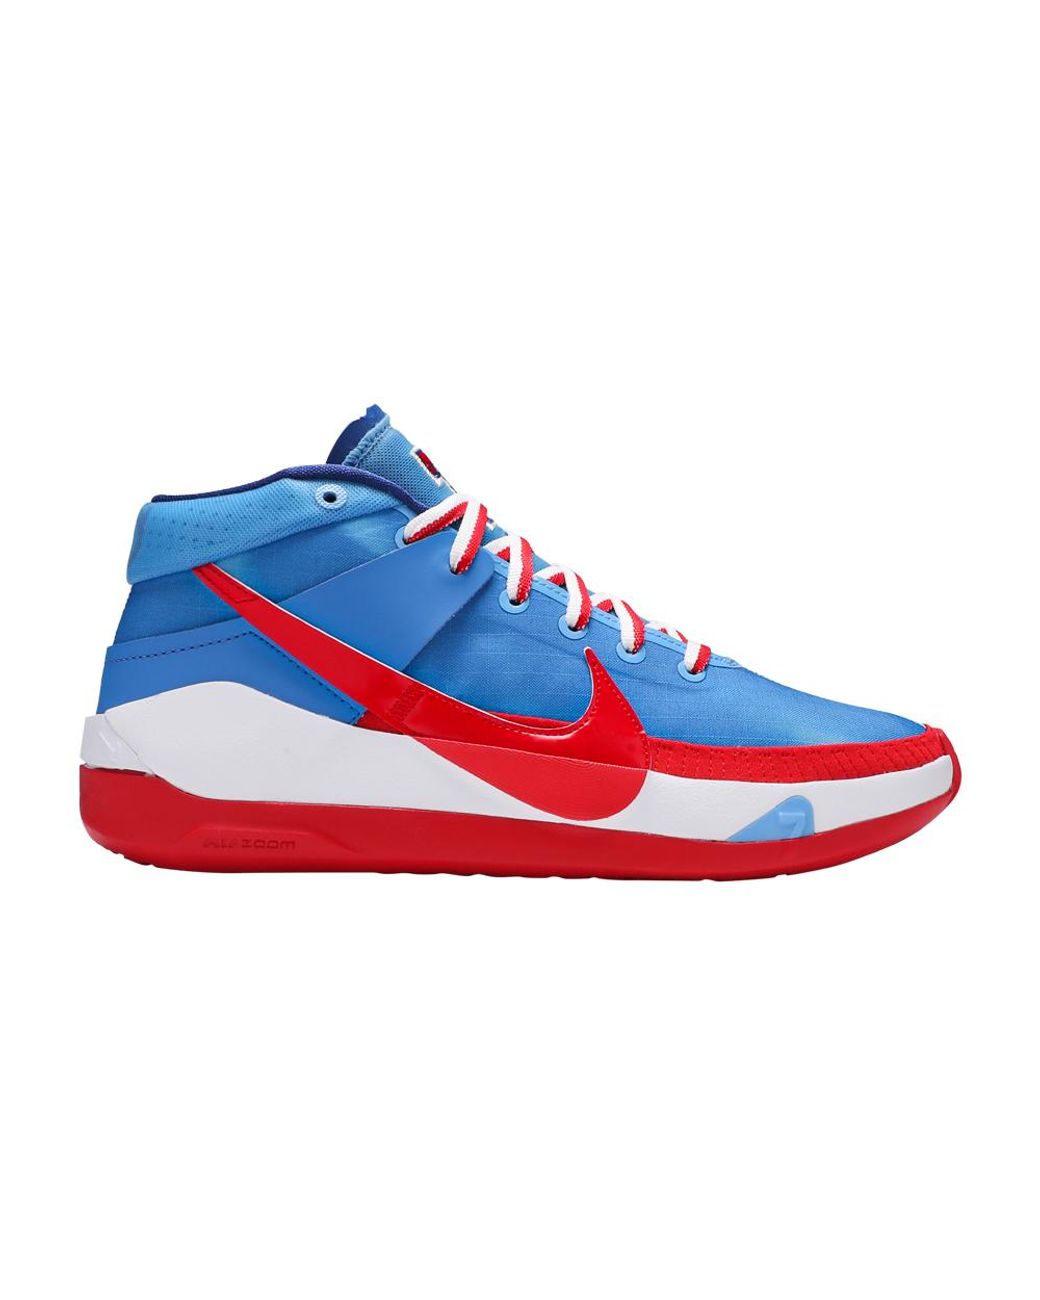 KD 13 - The Easy Money Snipers- Basketball Store